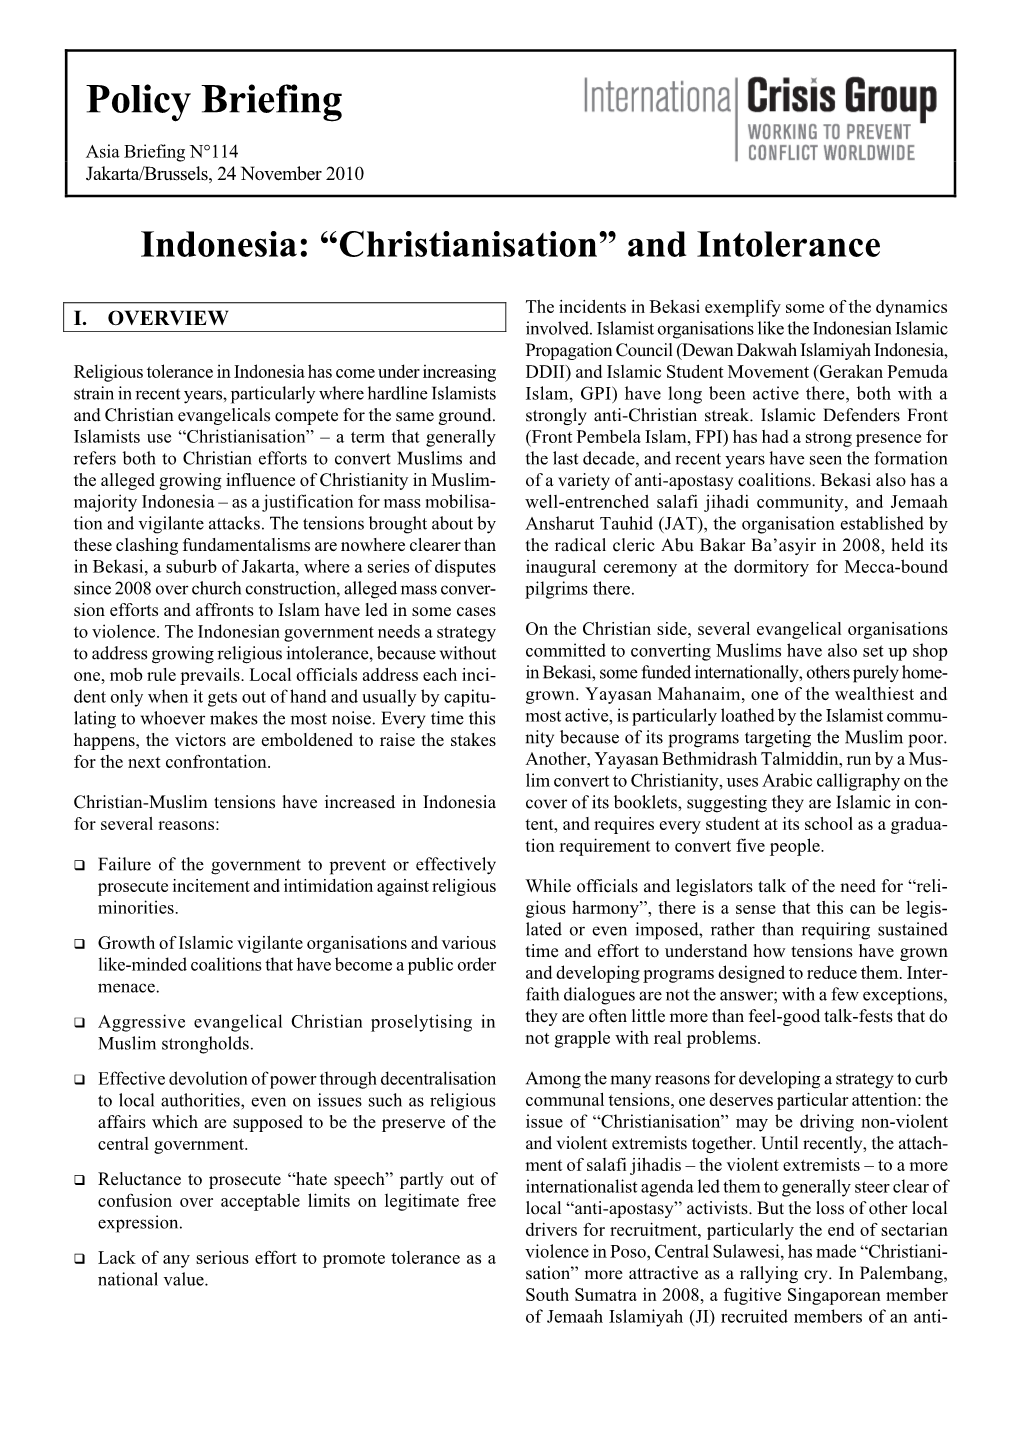 Indonesia: "Christianisation" and Intolerance